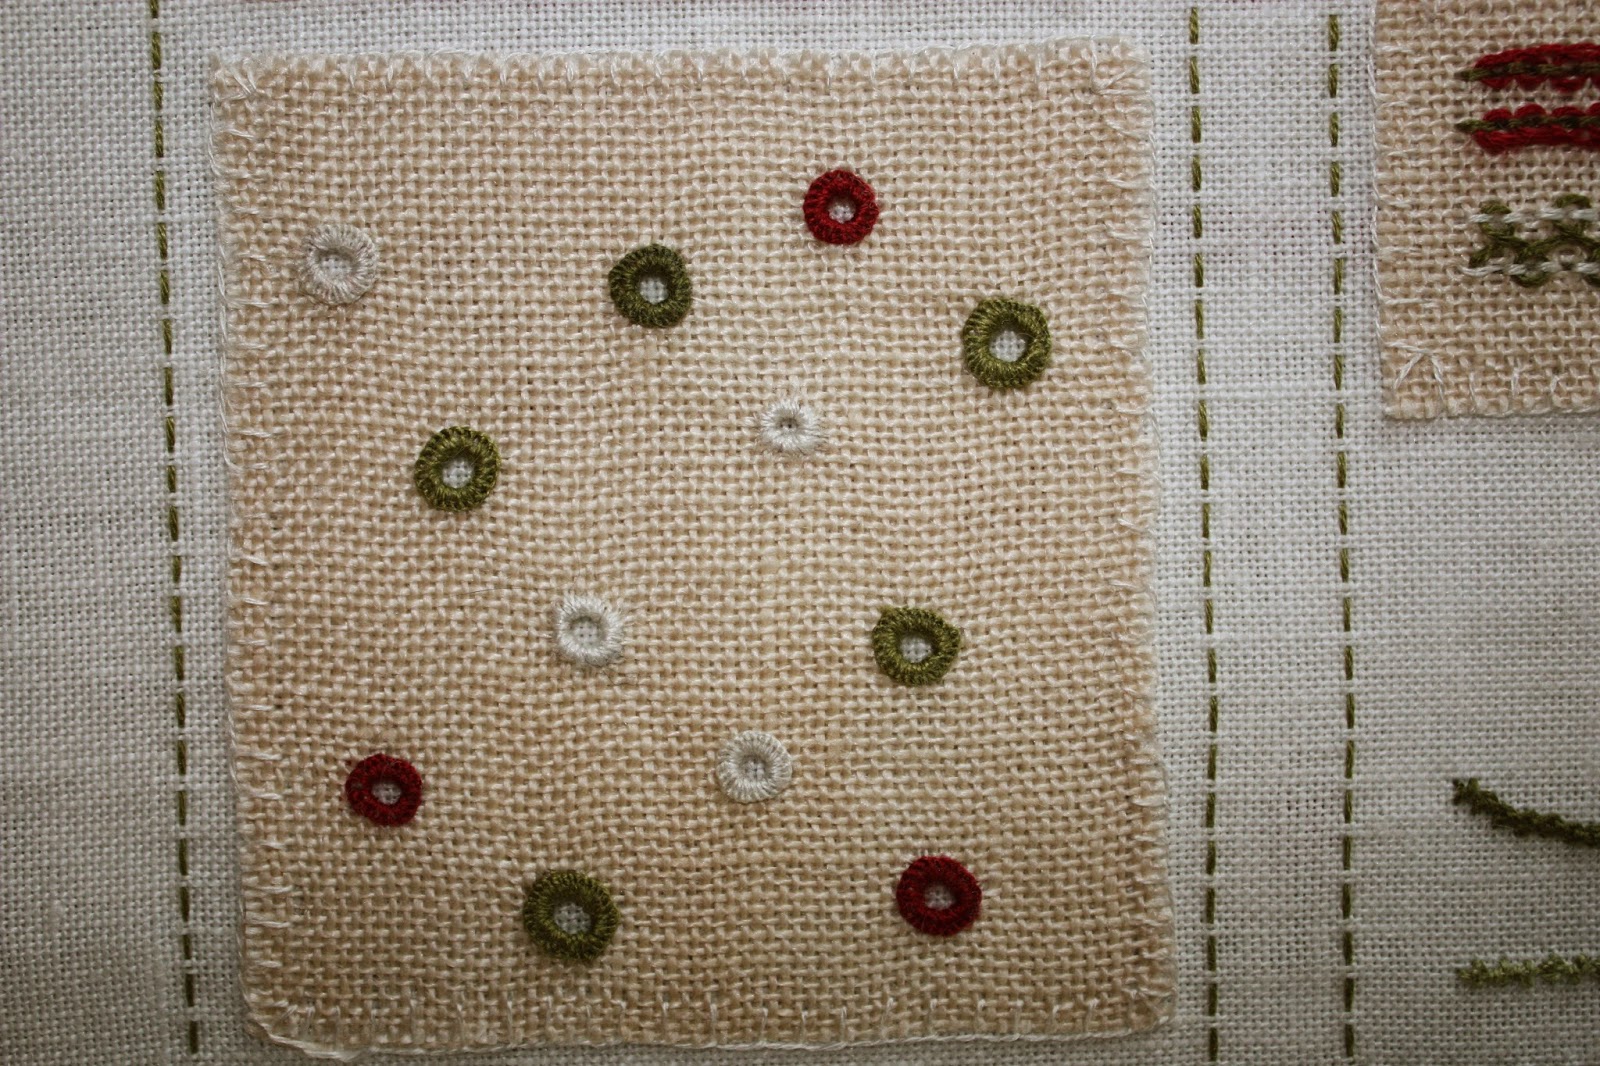 Fred's Wife: SAL Mon Cahier de Broderie Hoja 3 Pagina 5 & 6 Finished